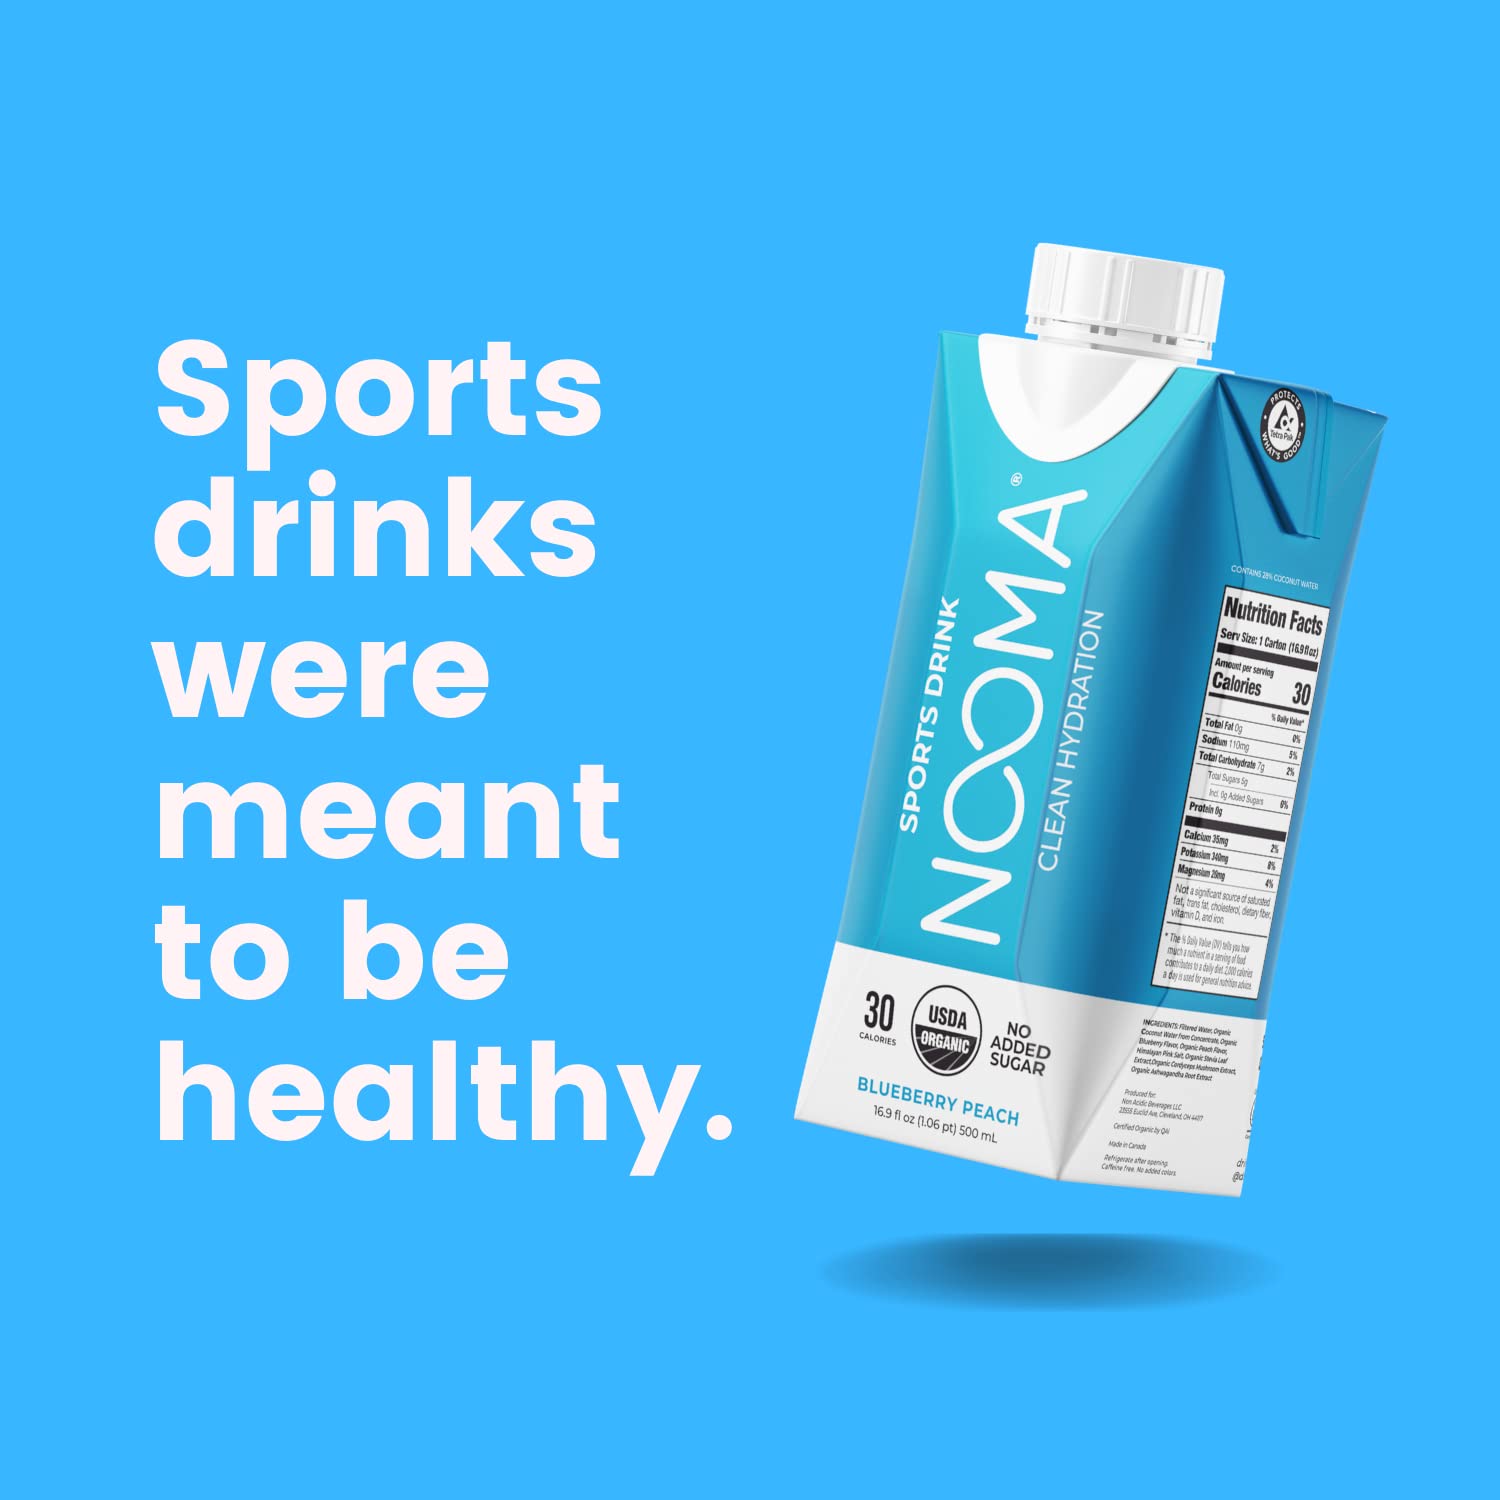 NOOMA Organic Electrolyte Sports Drink with Organic Coconut Water | Workout Hydration Drink with No Added Sugar | 30 Calories | Blueberry Peach 500ml